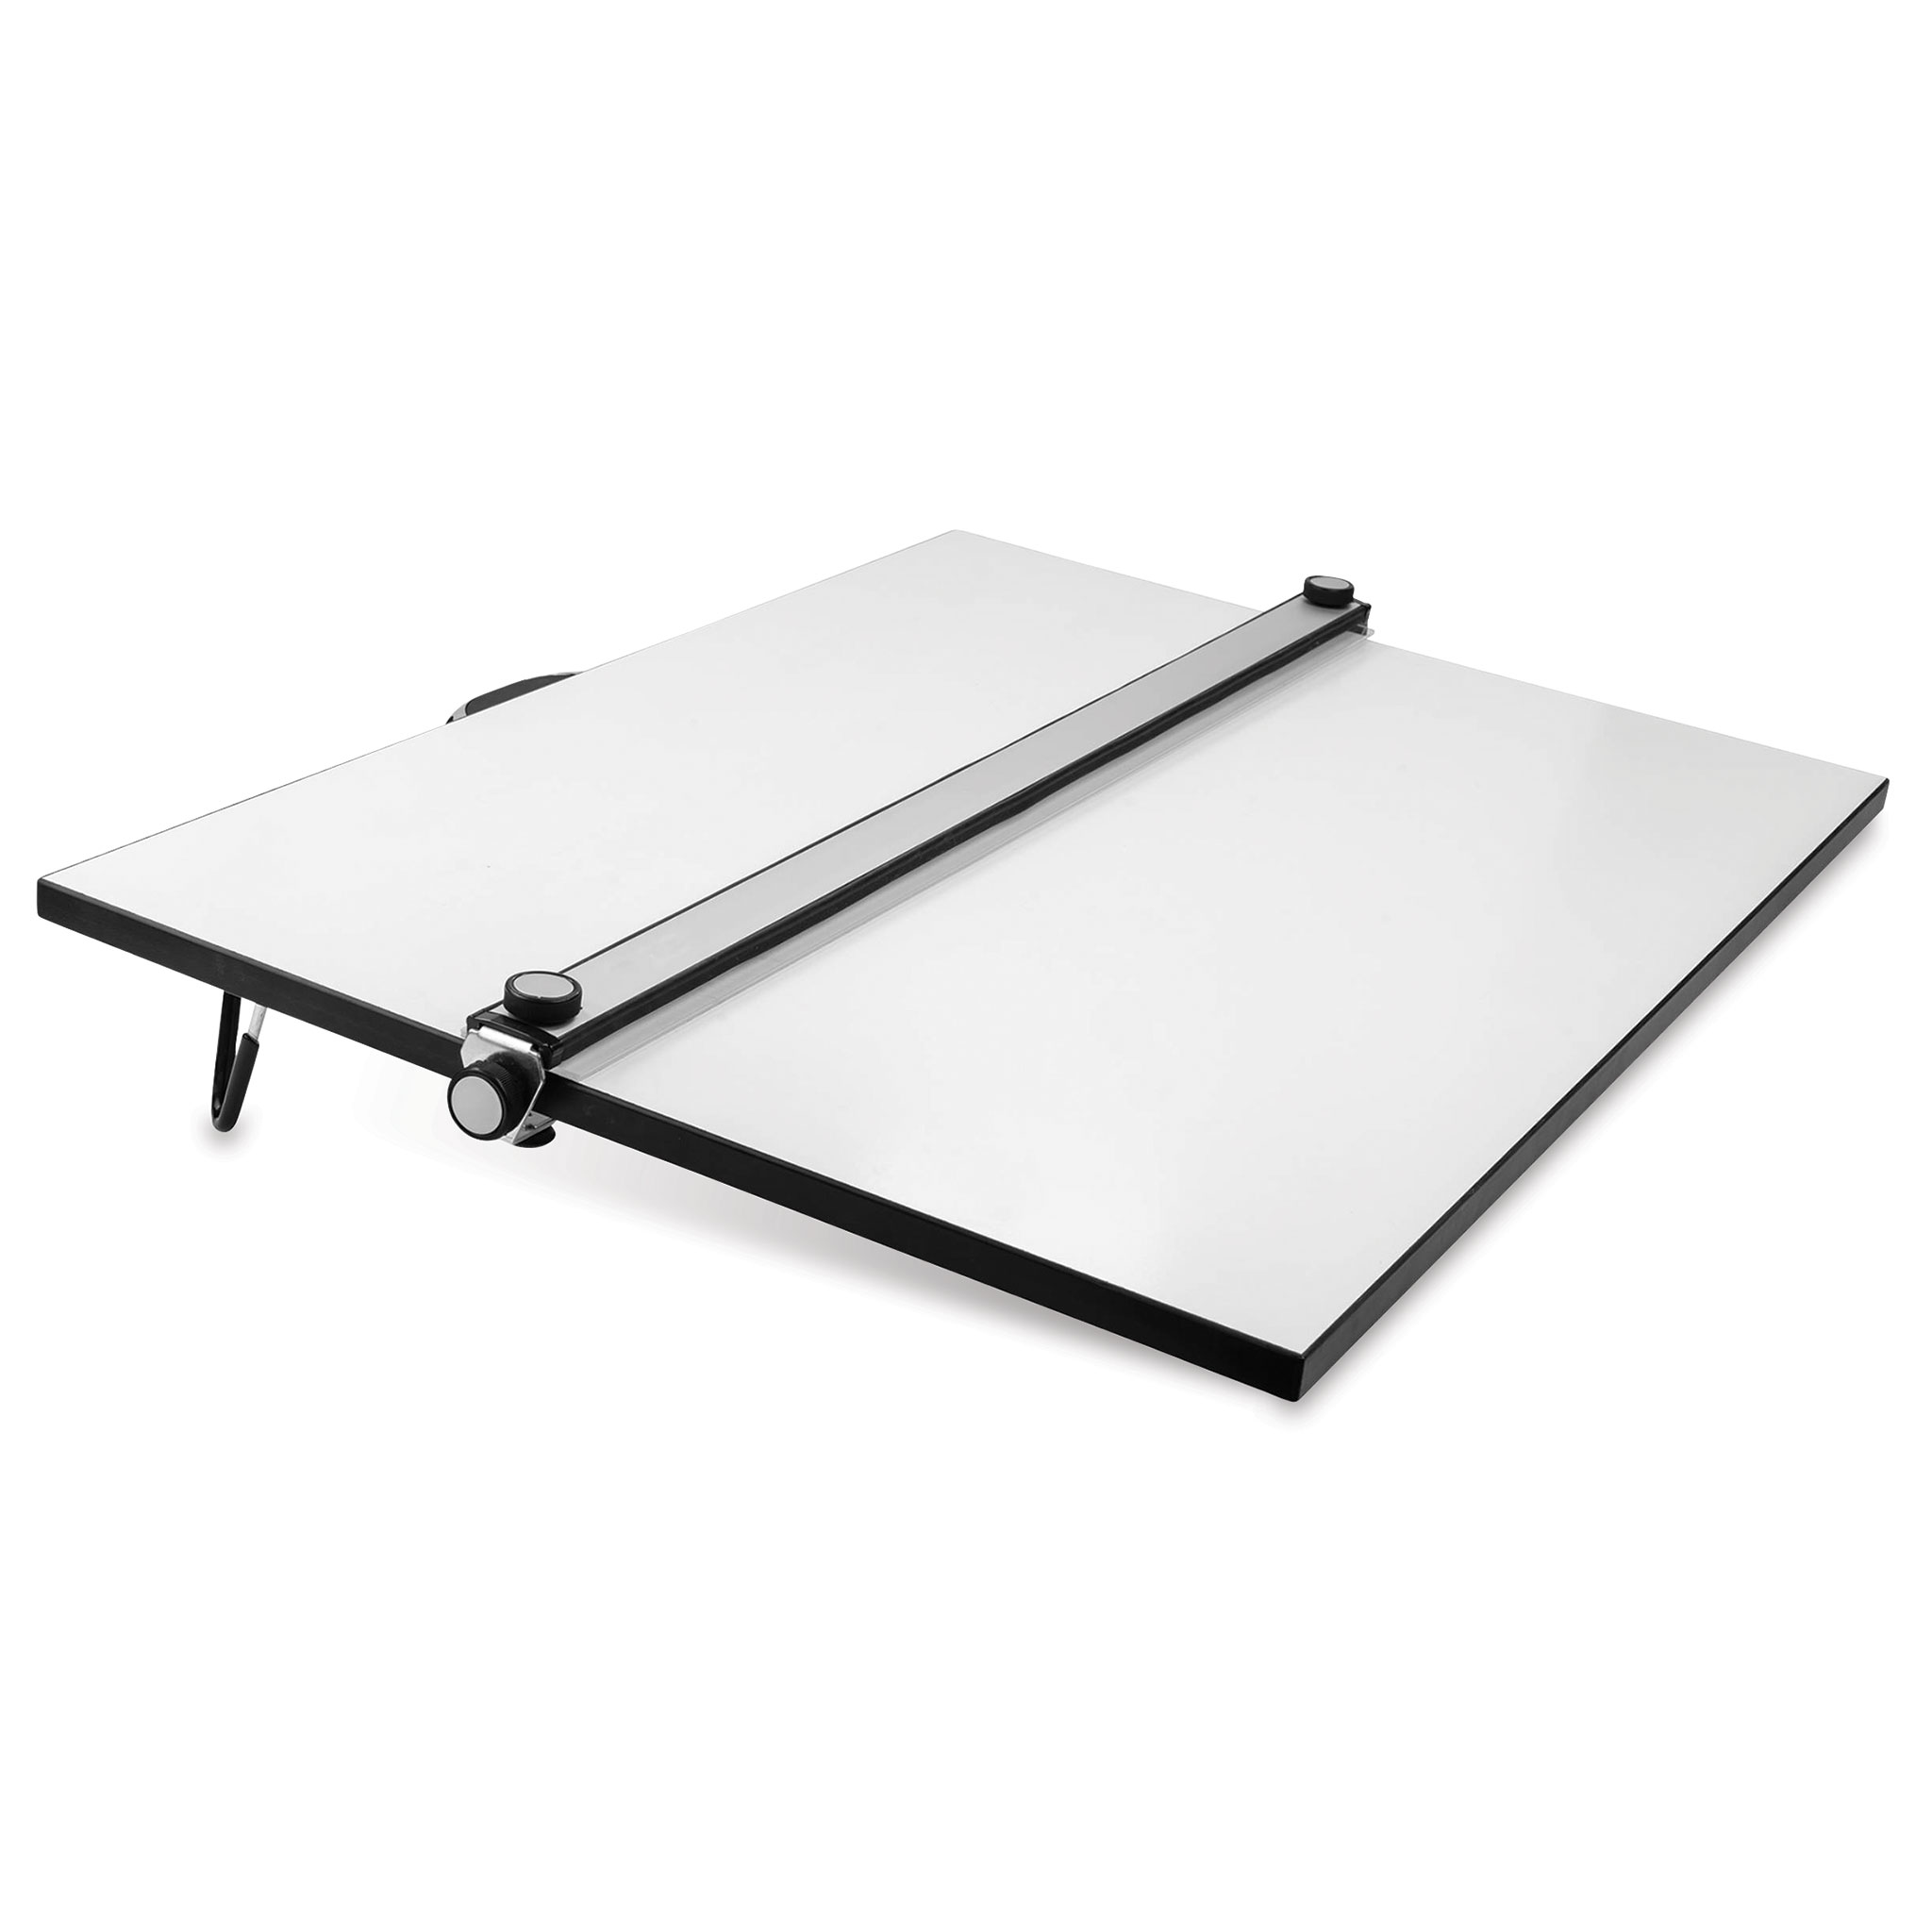 Sketch Board, Hardboard Sketchboard Portable Art Students Wooden Artist  Sketch Board Solid Drawing Board for Artists Students and Creatives